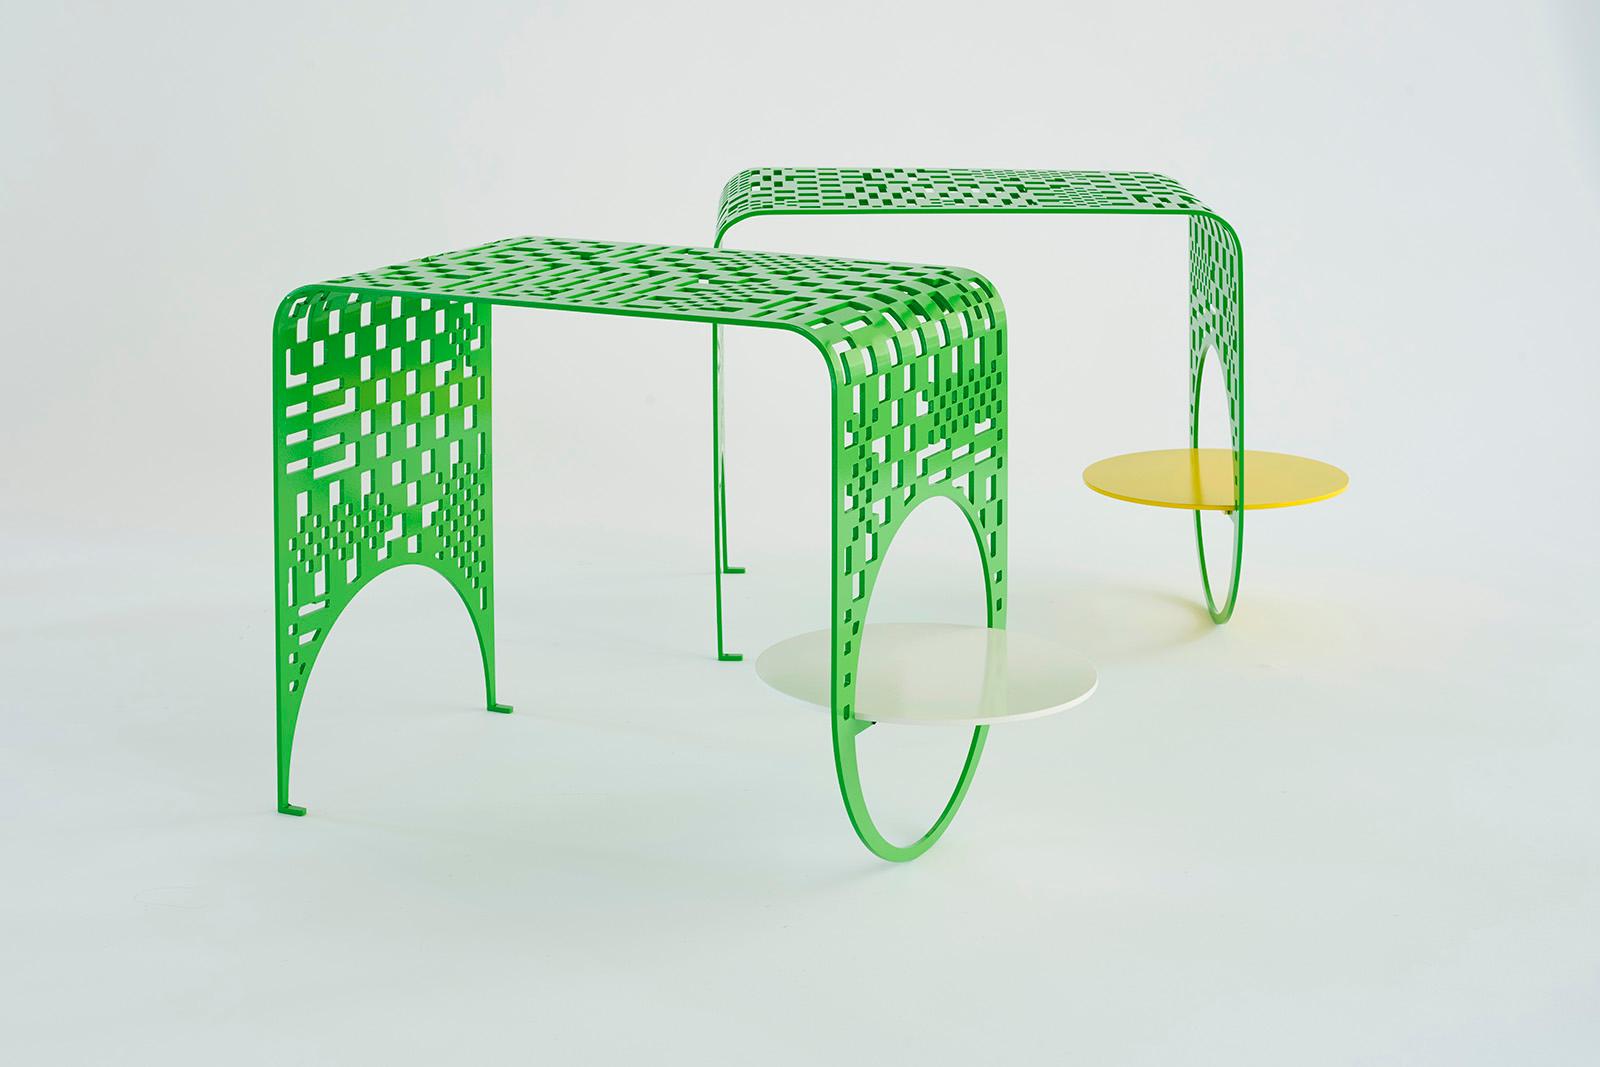 For their debut outdoor furniture collection Kin & Company, in collaboration with renowned textile designer Dusen Dusen, has created the Thin Check Table as part of a collection of playful lounge chairs and side tables perforated using one of Dusen